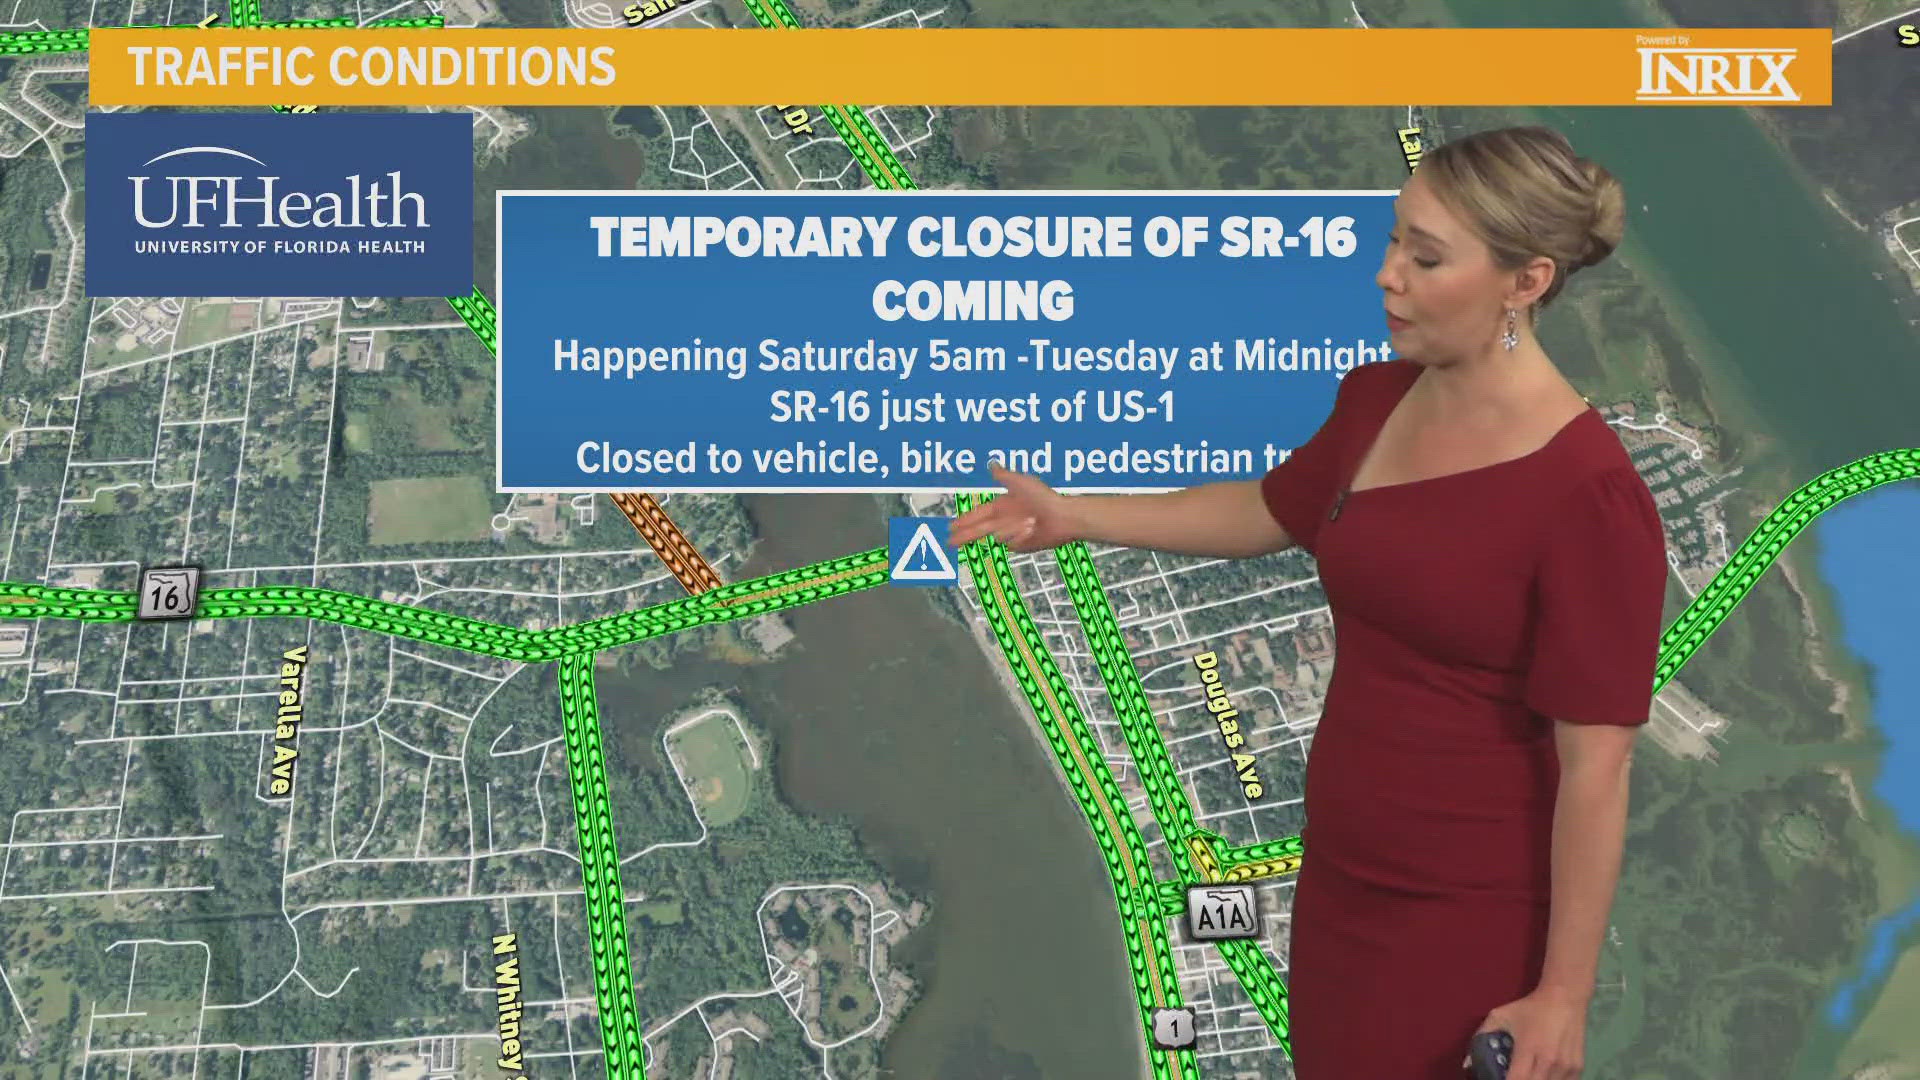 The Florida Department of Transportation is shutting down State Road 16 west of US-1 beginning on Saturday.